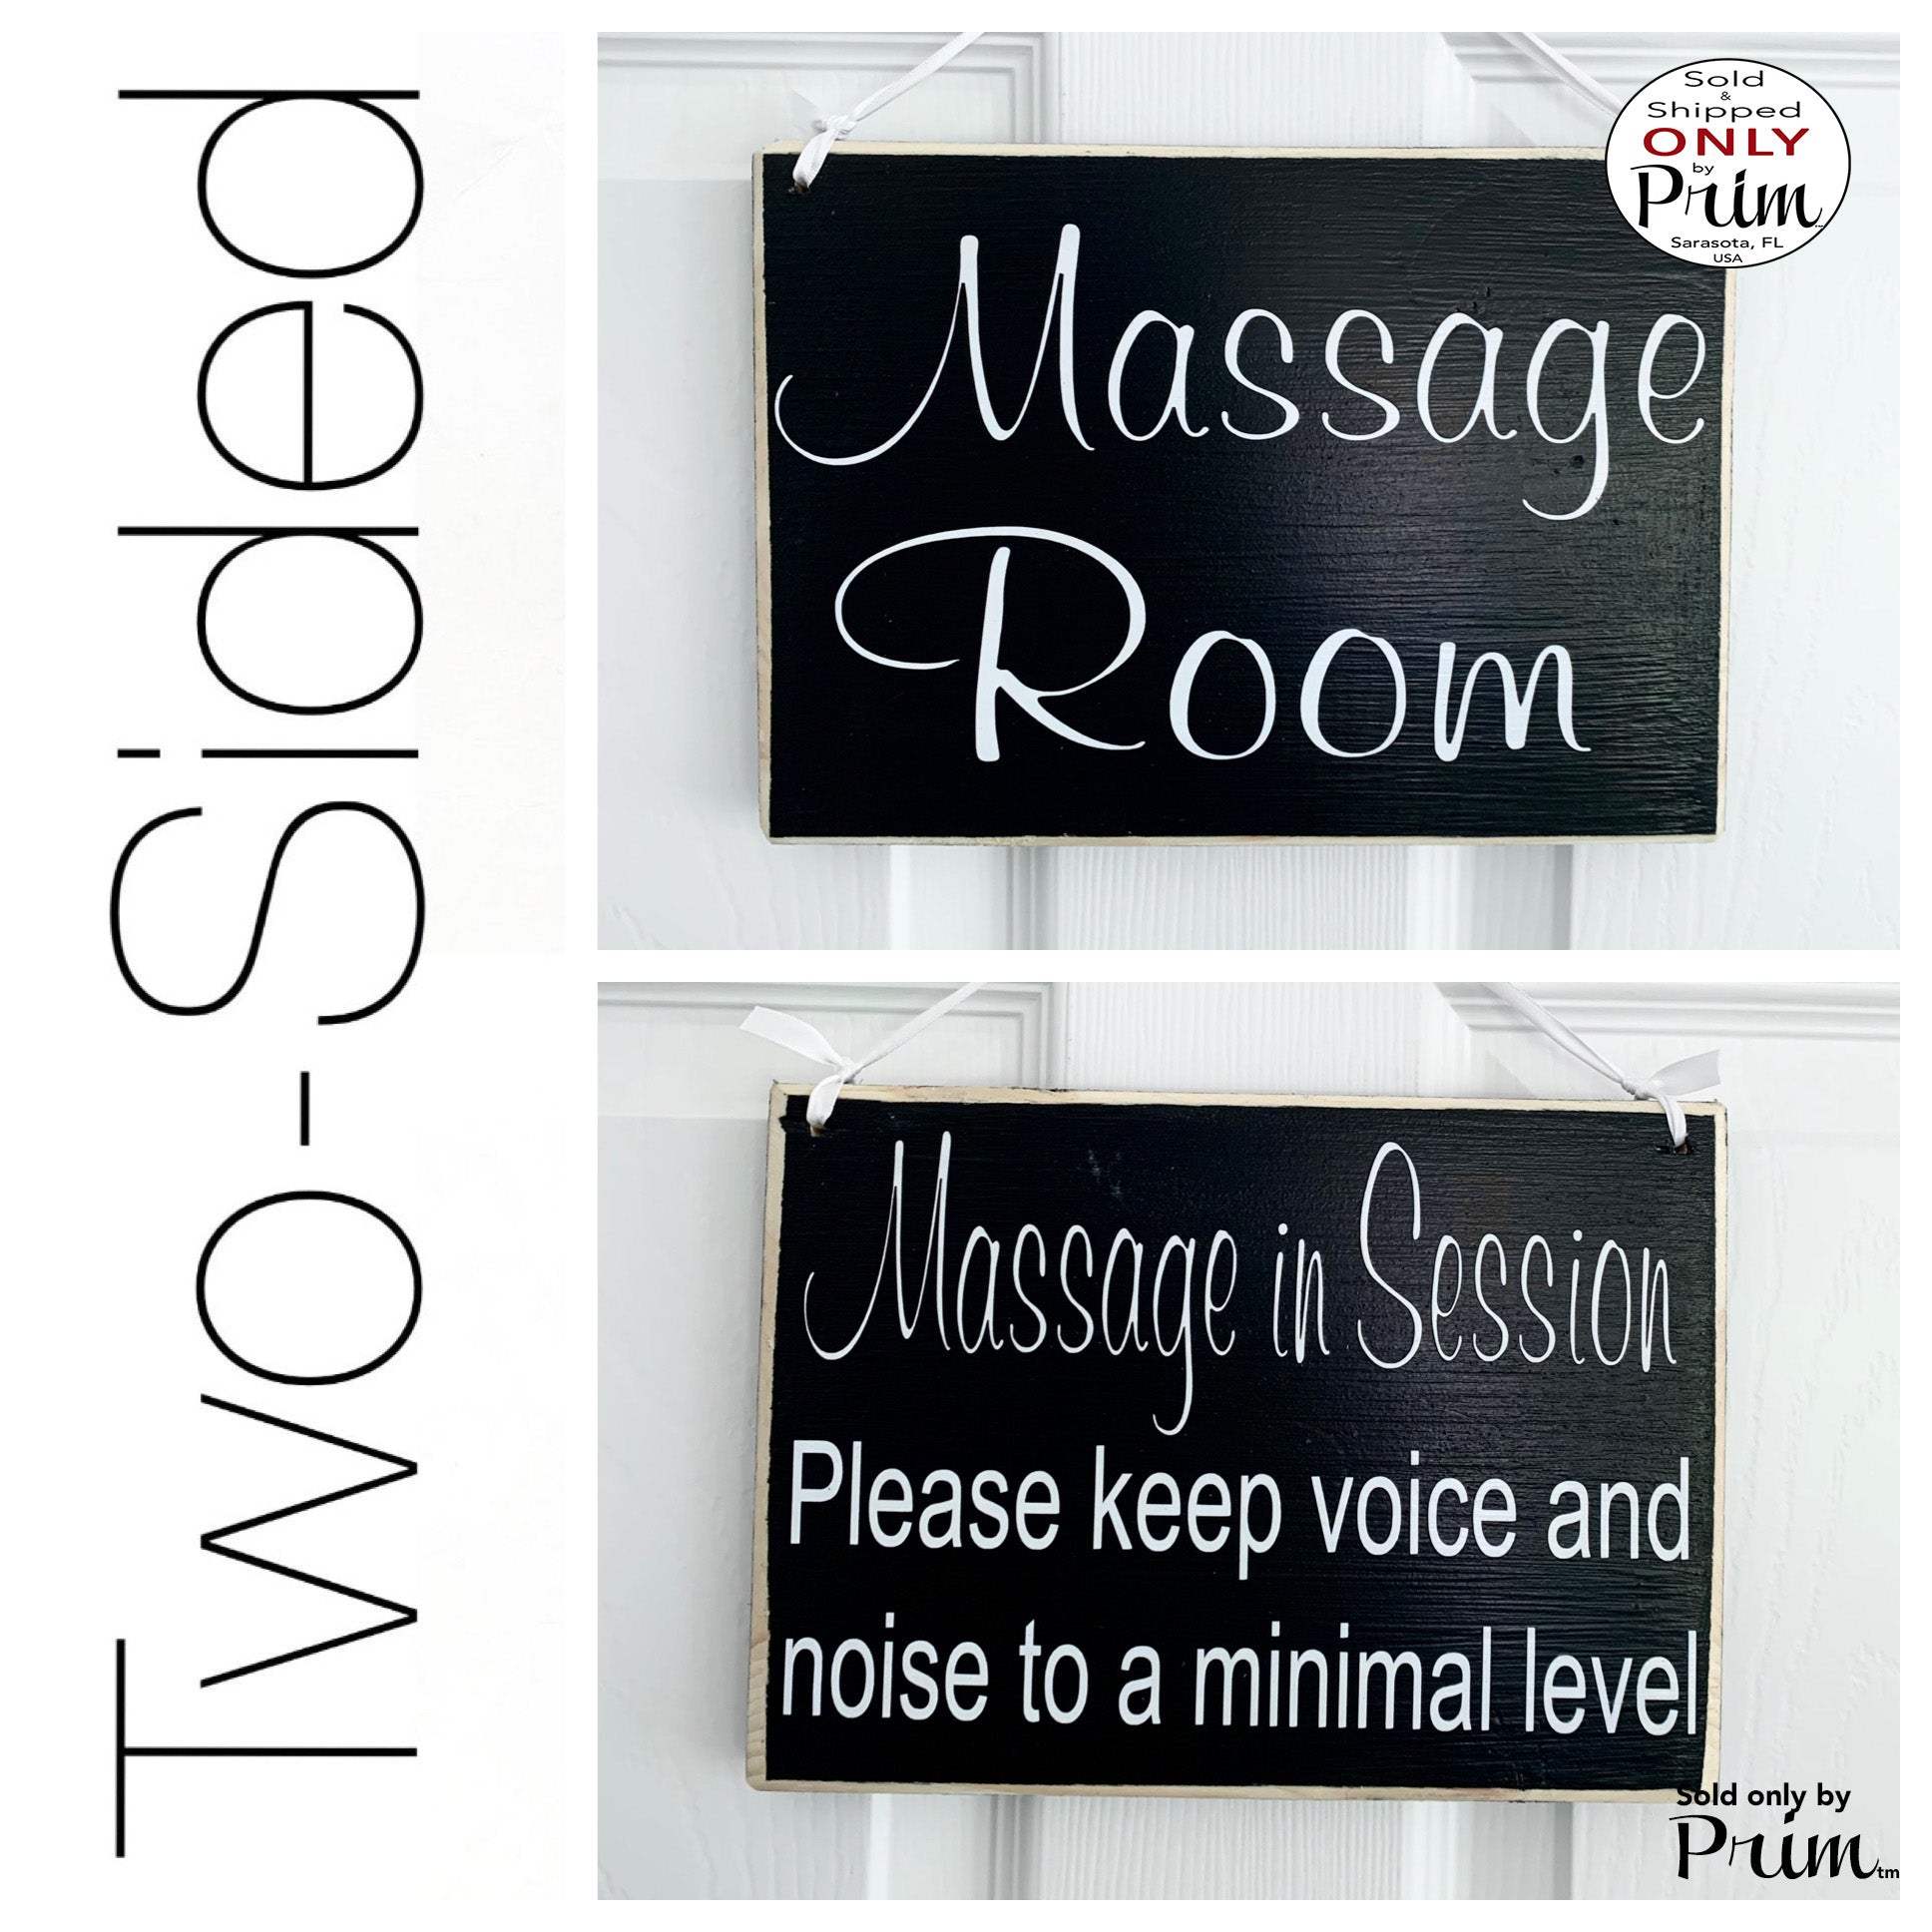 Designs by Prim 10x8 Massage Room In Session Please Keep Voice and Noise to a minimum level Custom Wood Sign Please Do Not Disturb Speak Softly Door Plaque